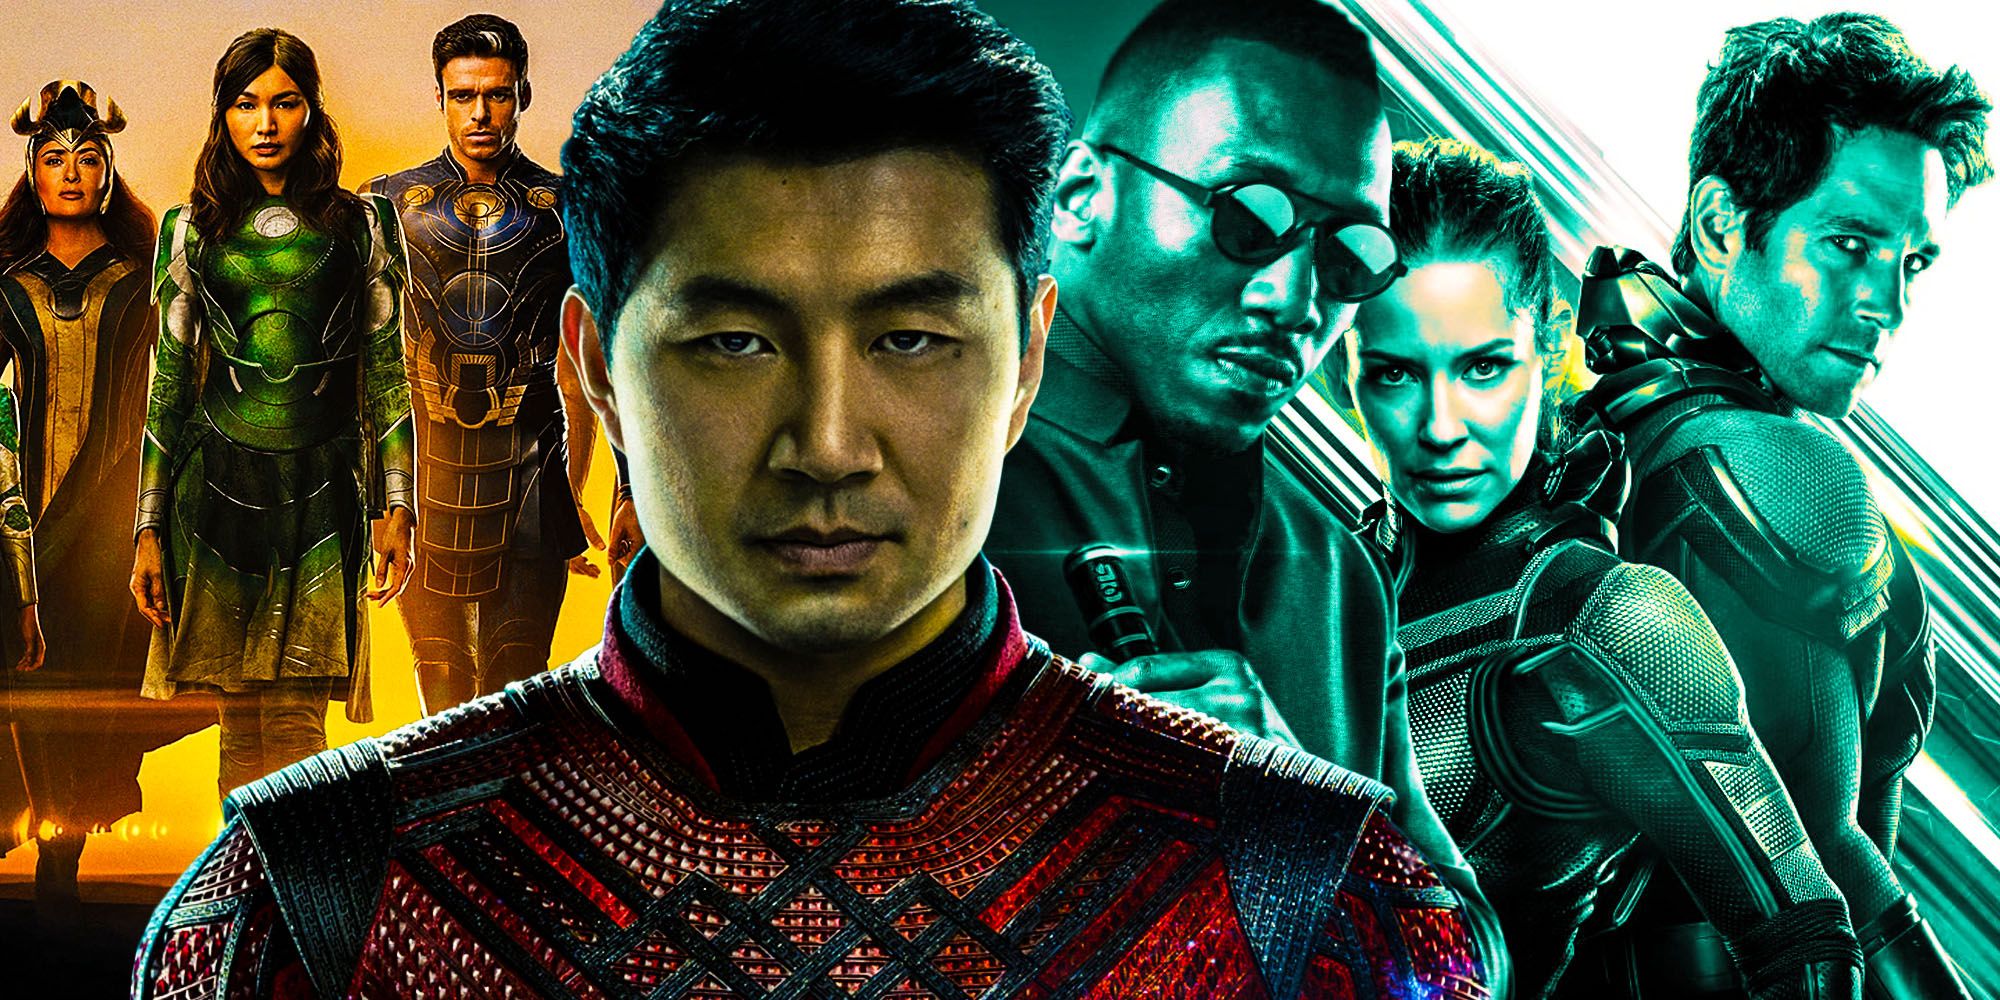 Marvel phase 5 movies blade antman and the wasp quantumania already more exciting than phase 4 shang chi eternals